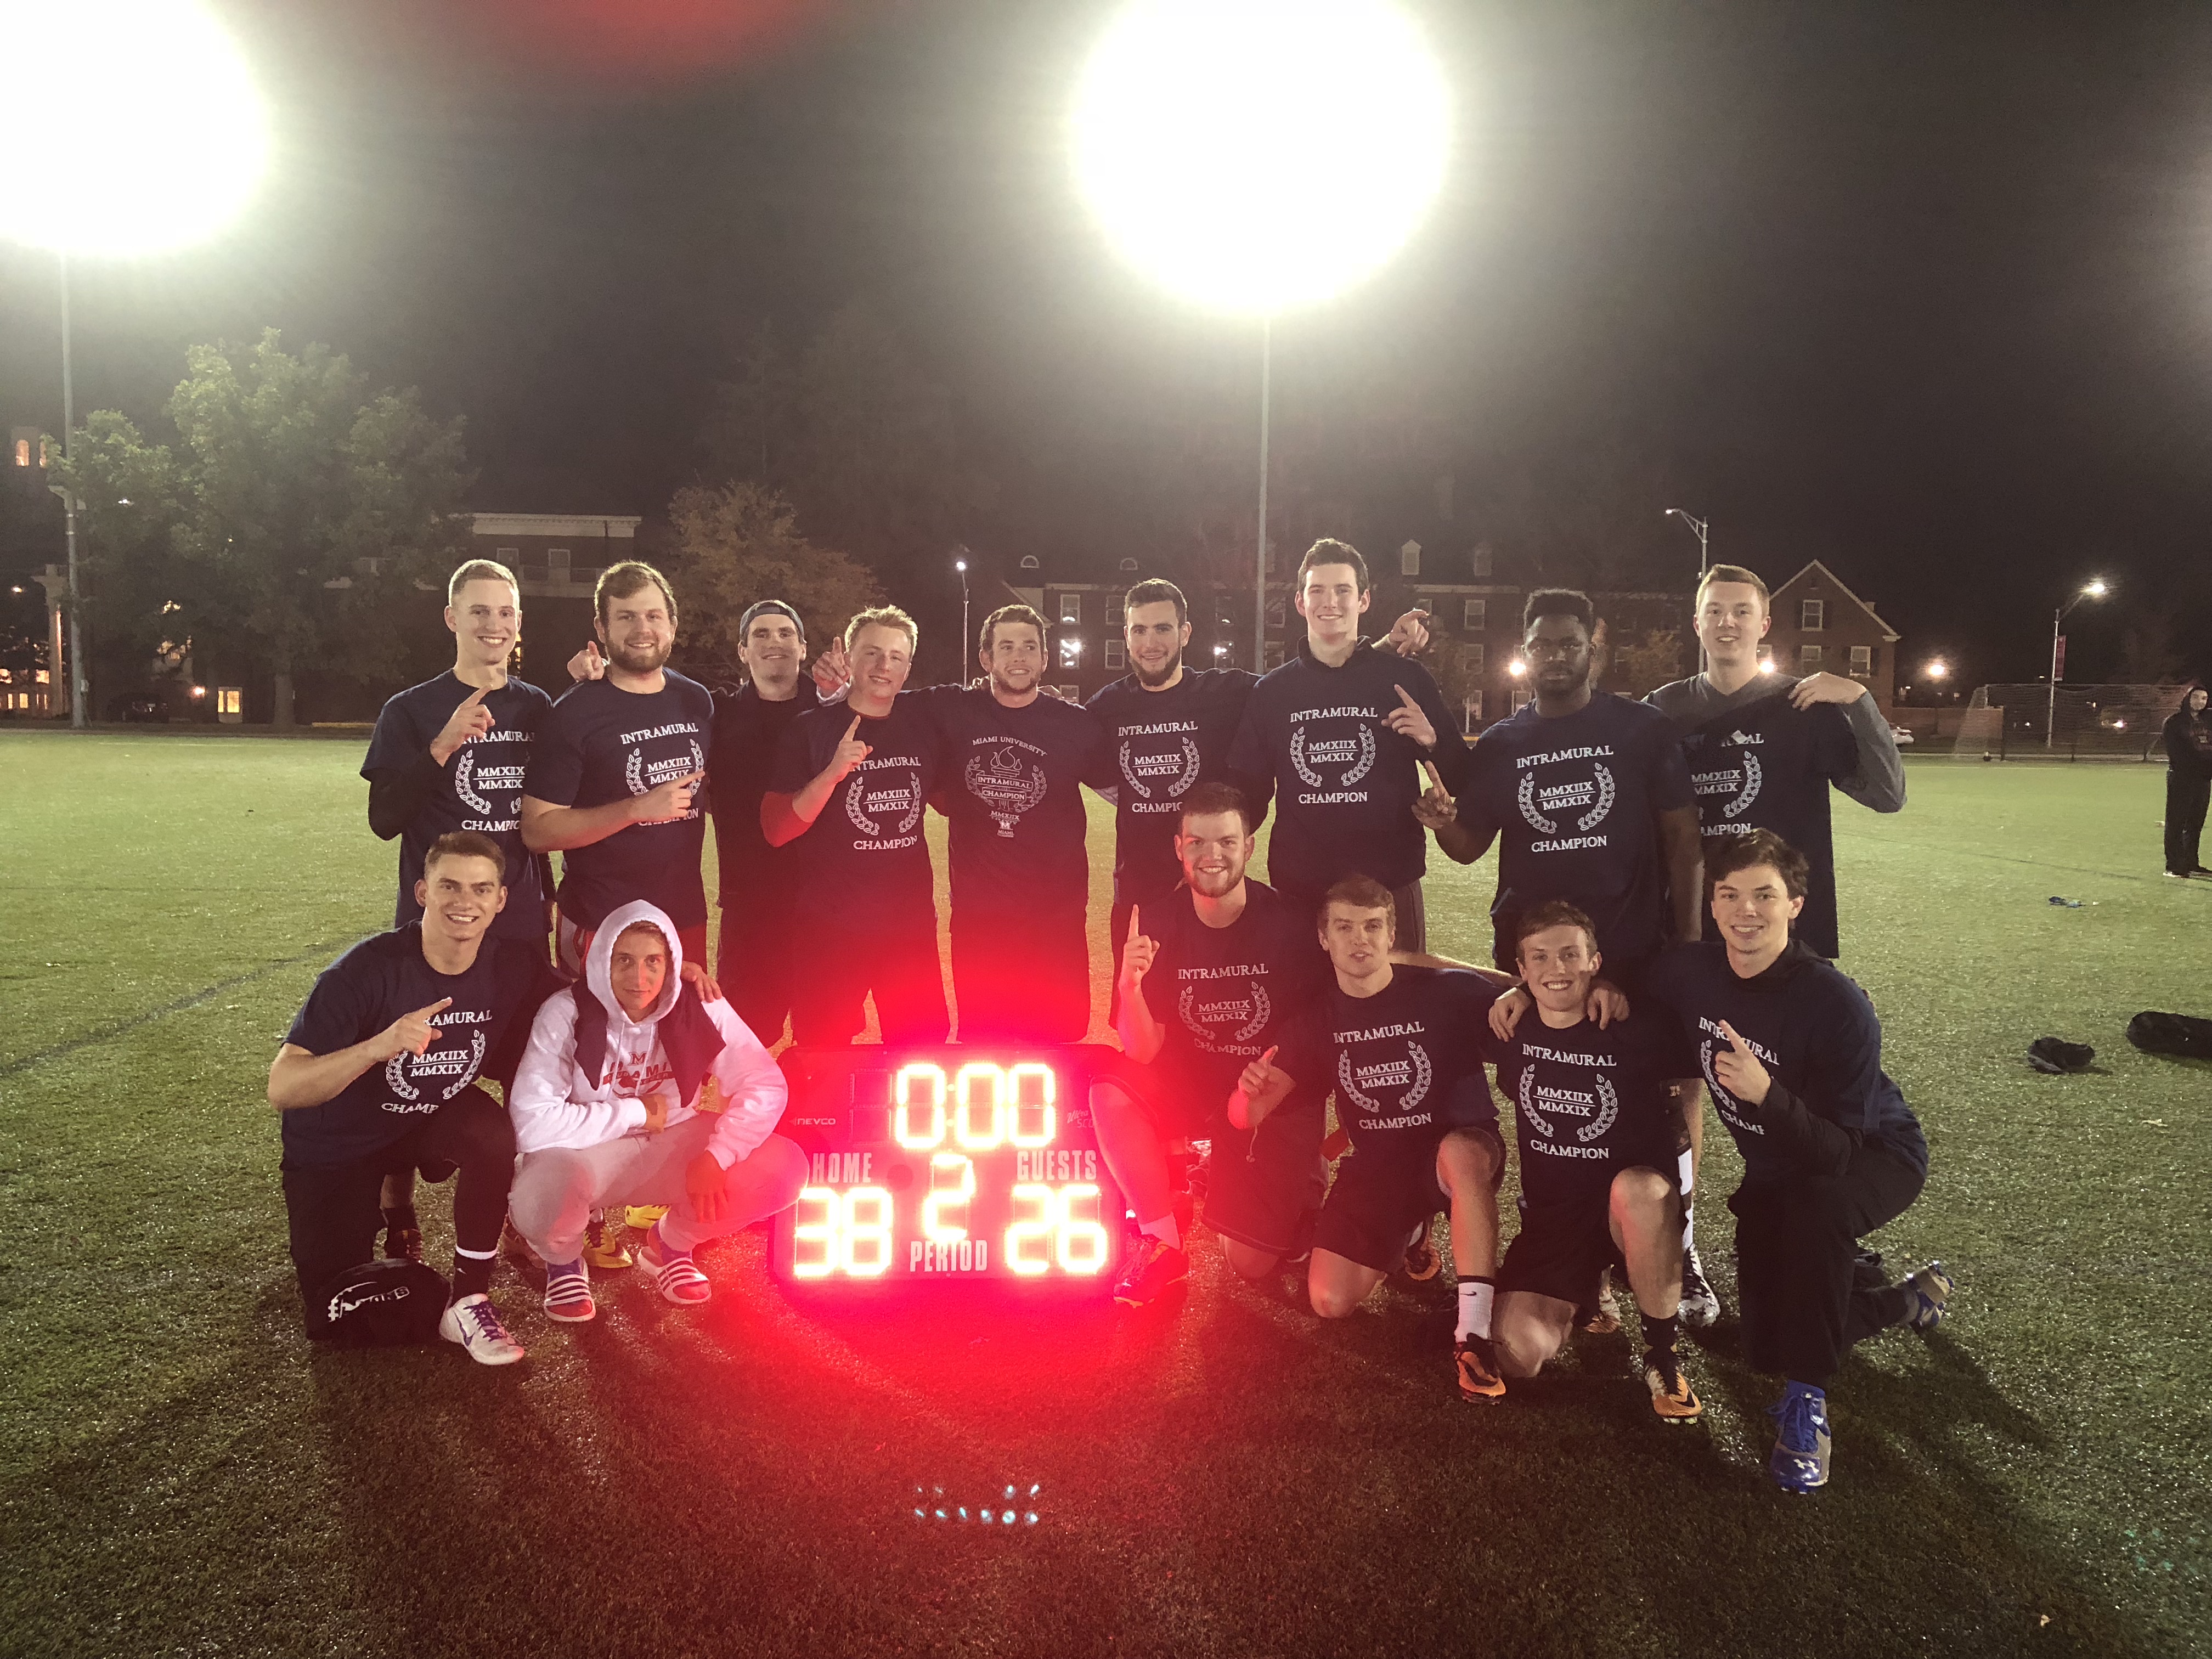 Champion flag football team stands around scoreboard to celebrate their victory.